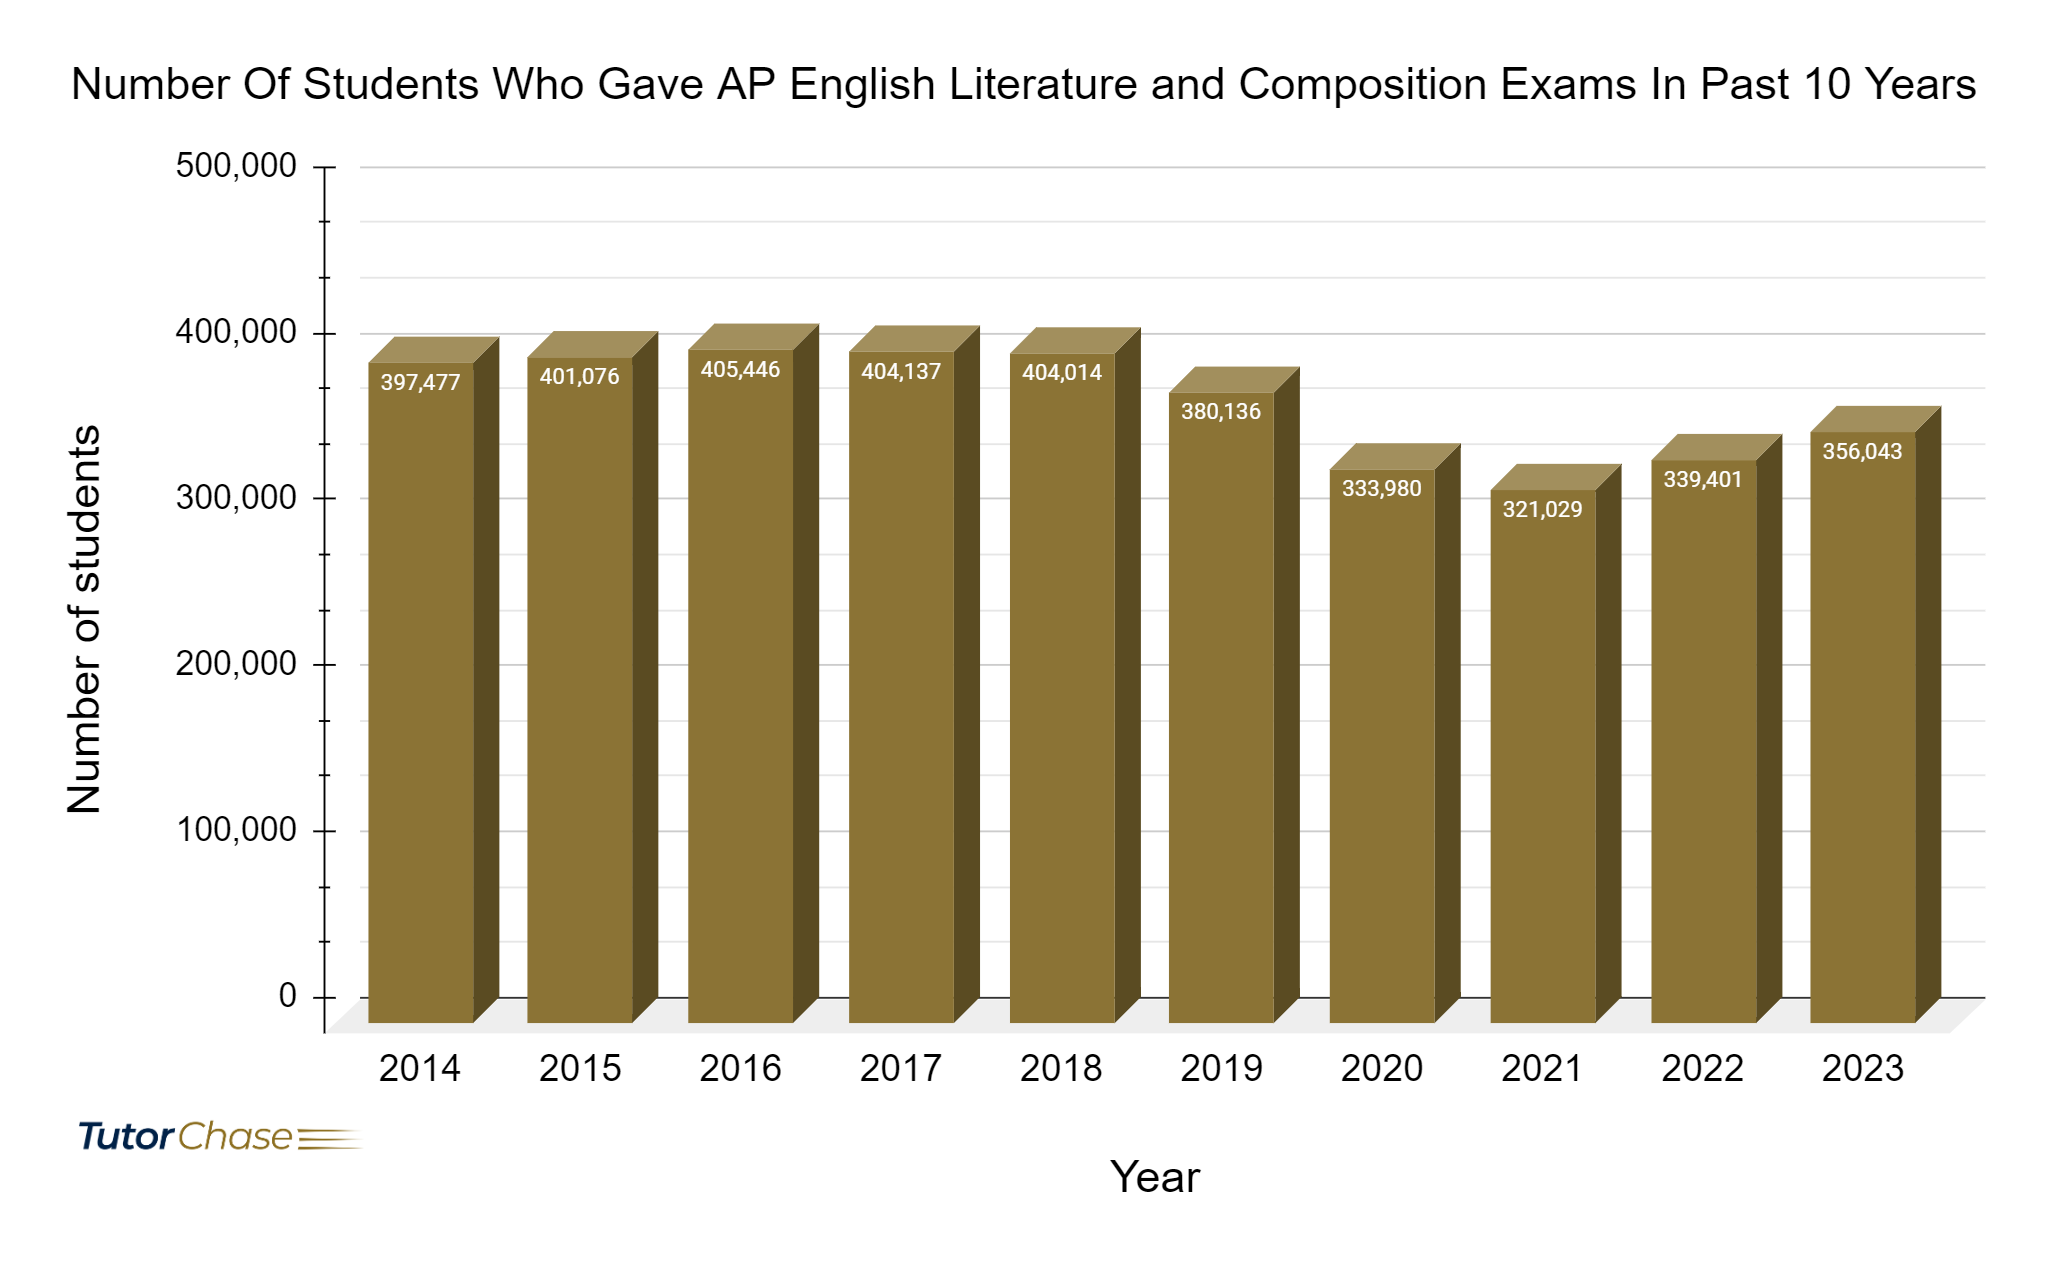 Number of students who gave AP English Literature and Composition Exams